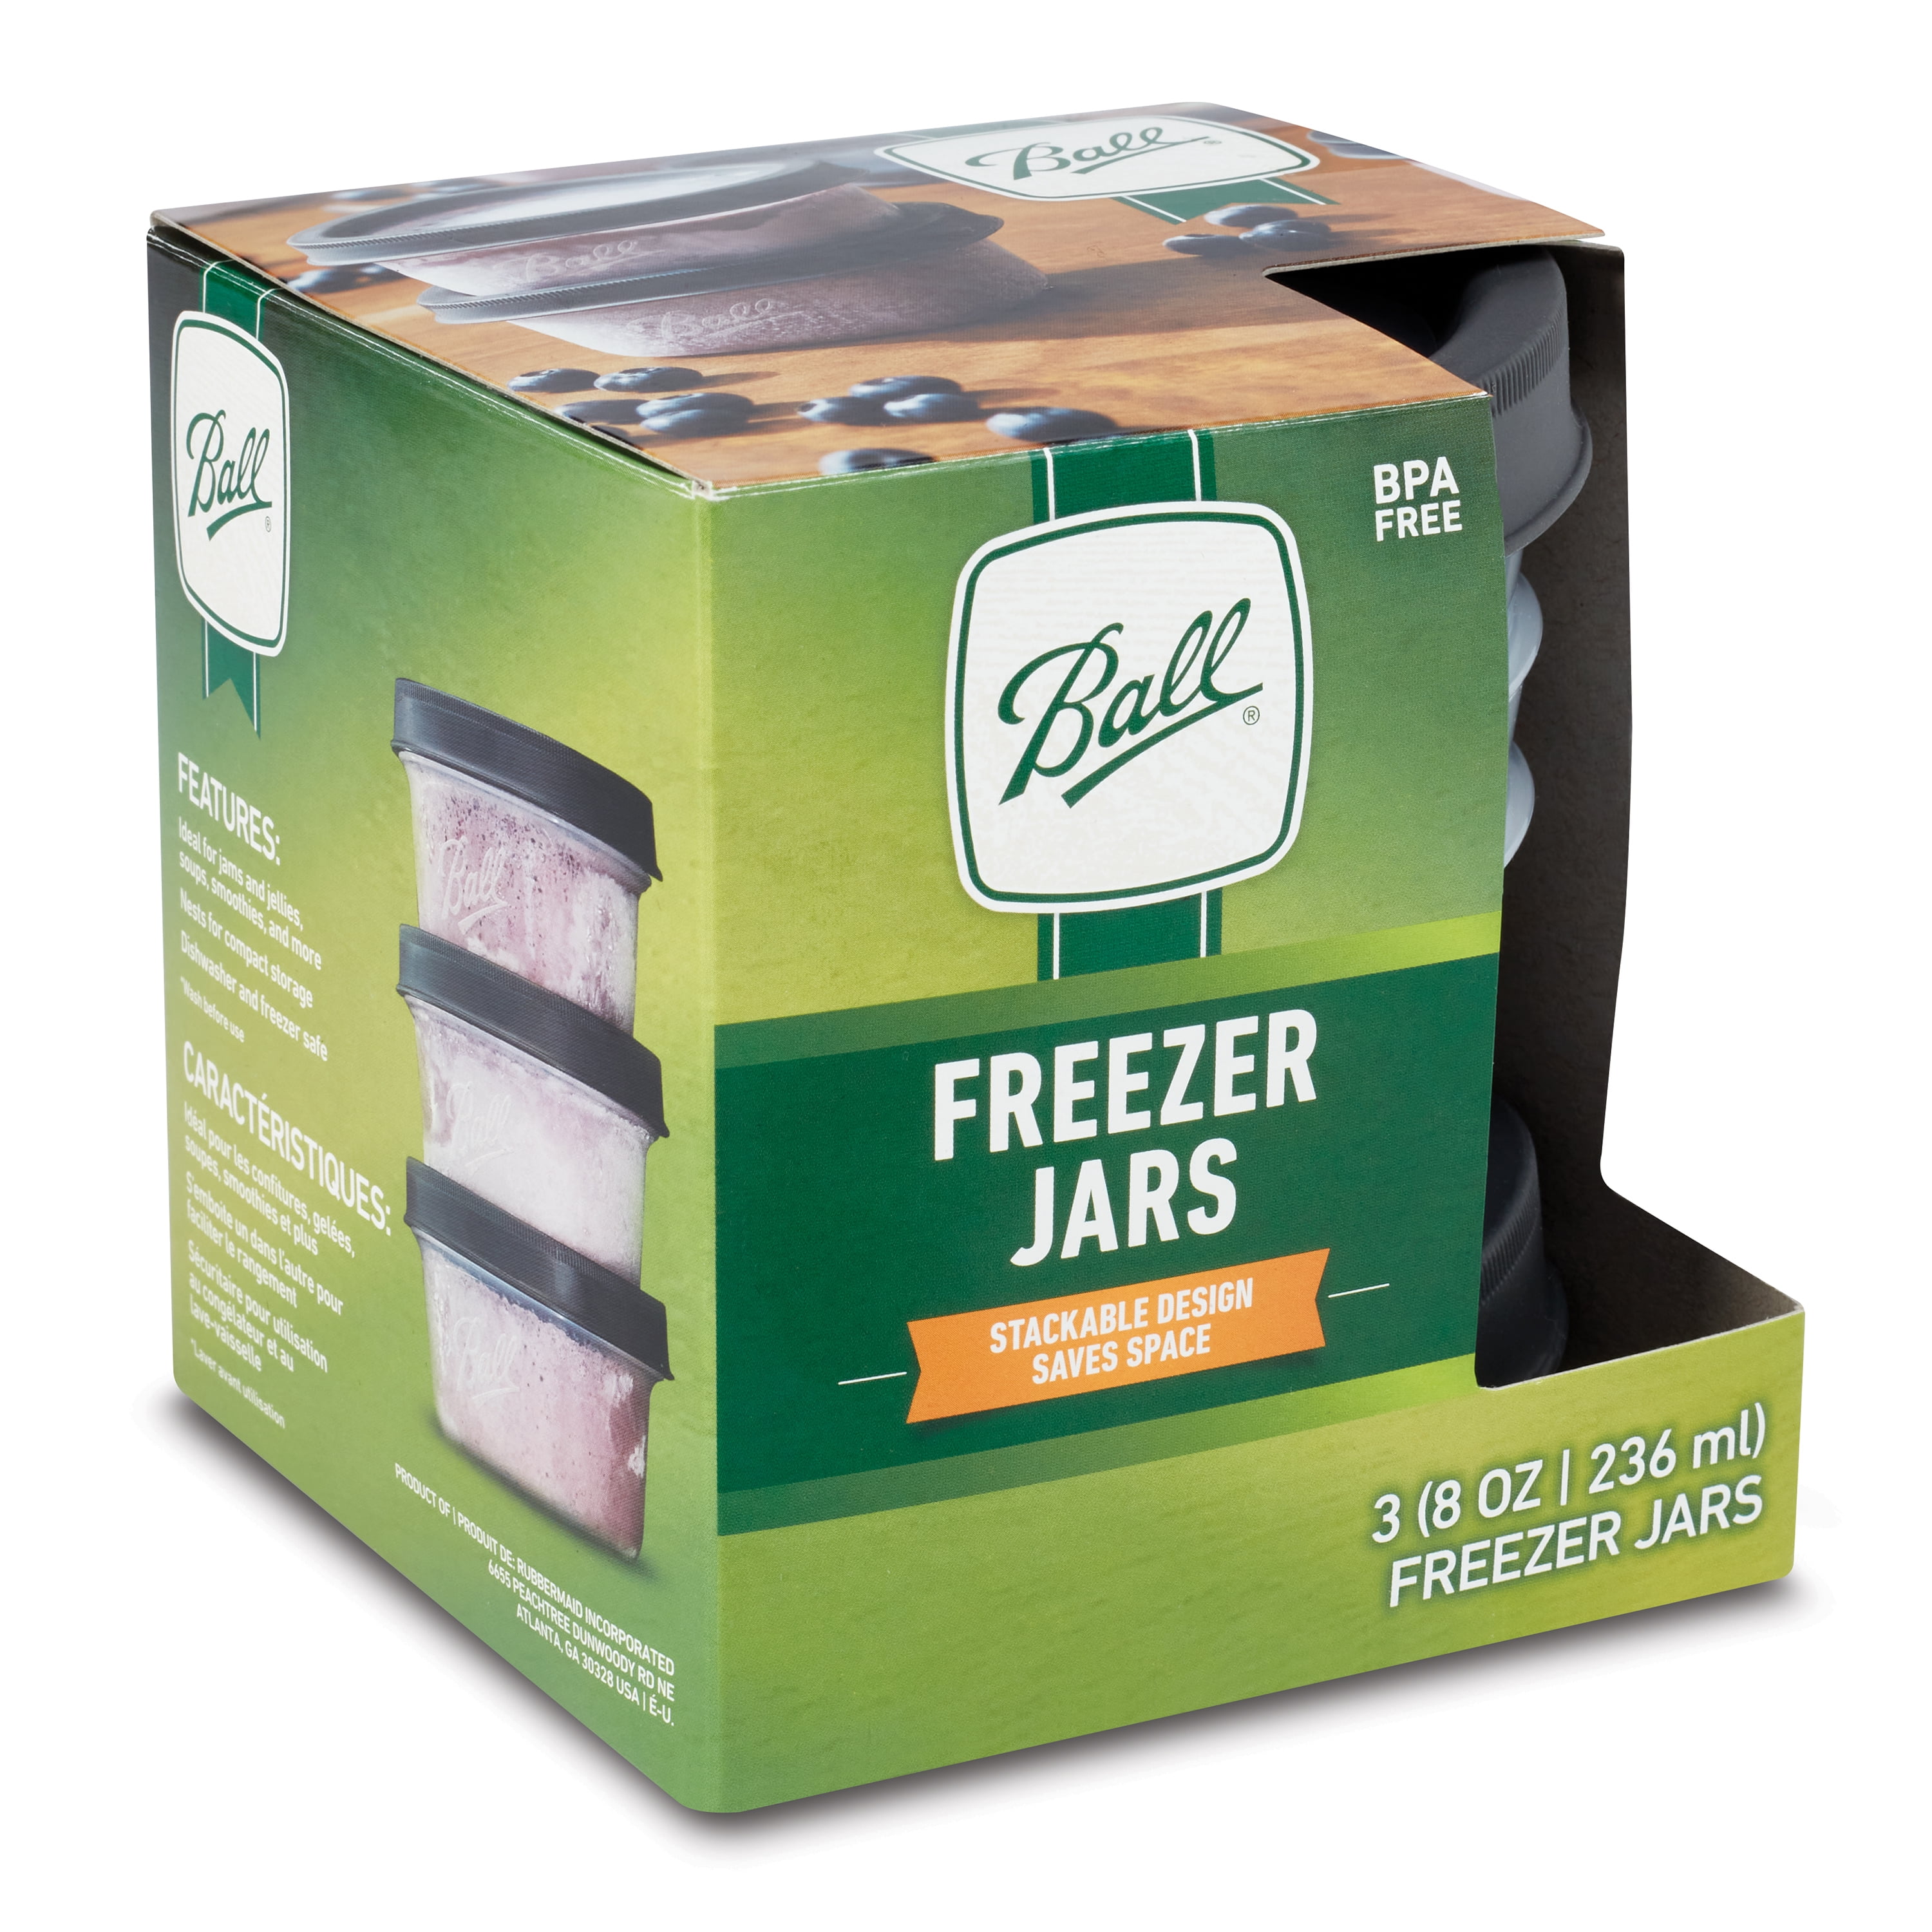 Easy Freezer Storage: Stackable Plastic Jars from Ball